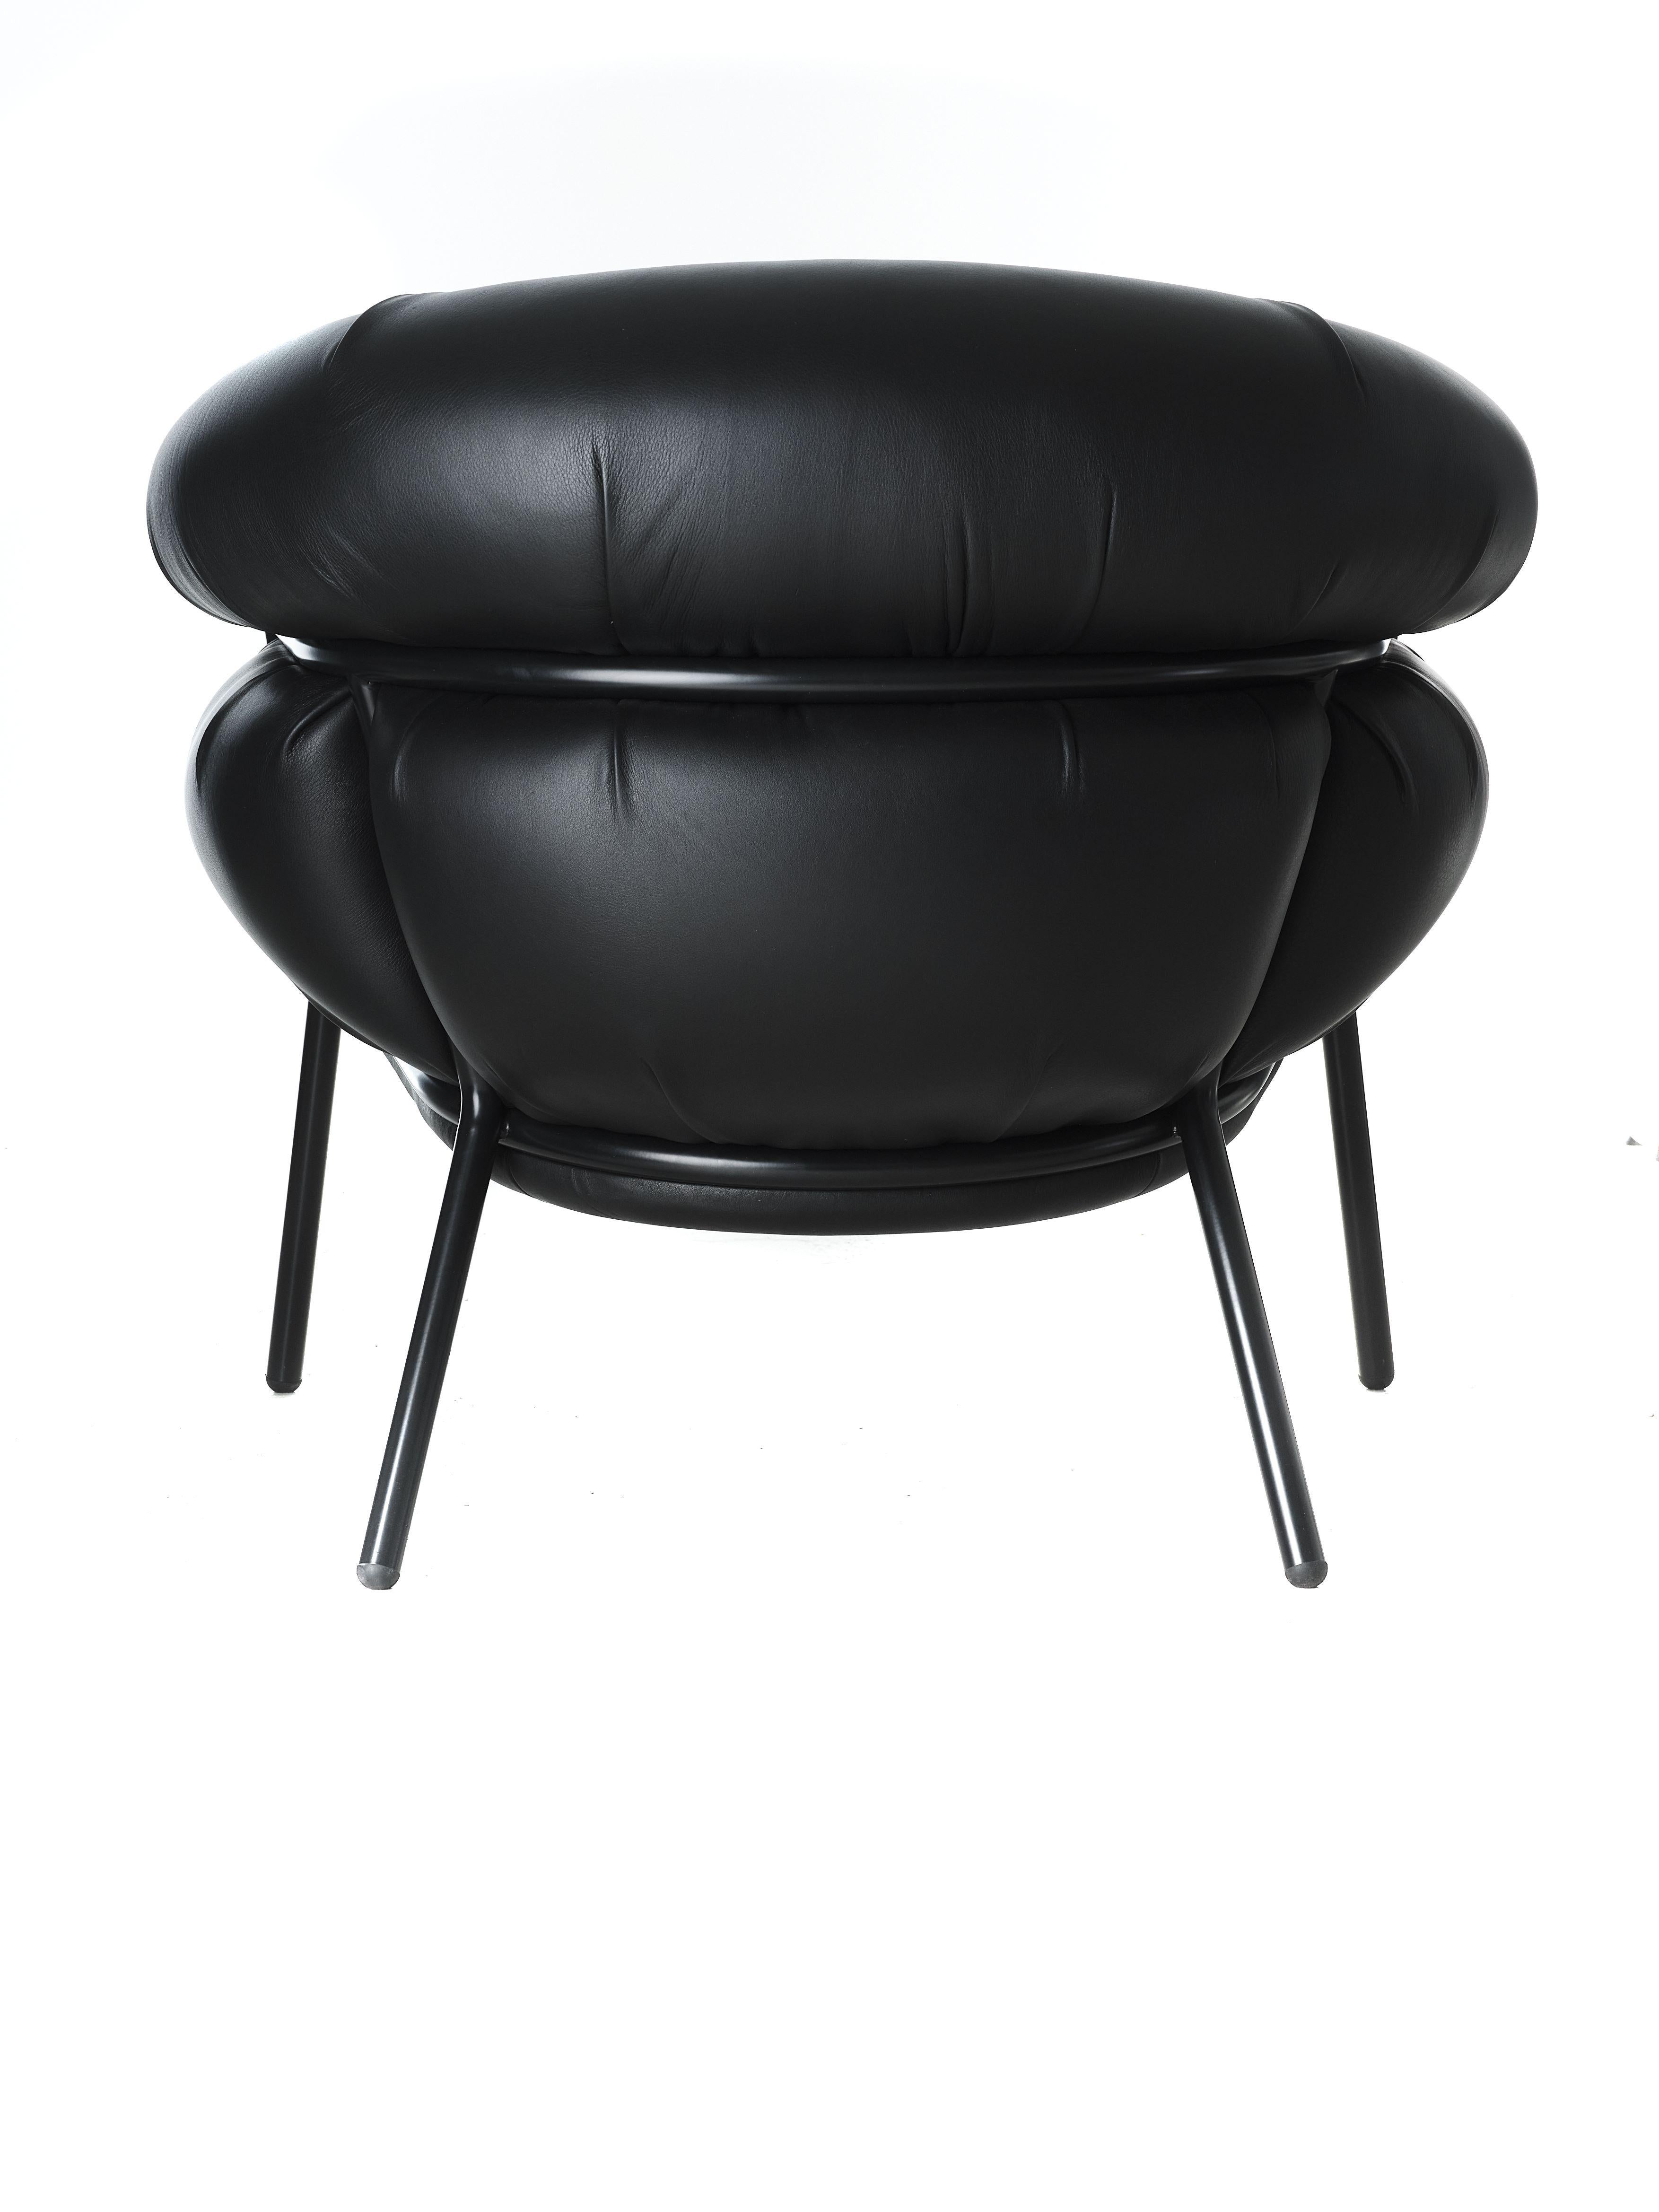 Spanish Grasso Armchair by Stephen Burks black padded leather upholstery black structure For Sale